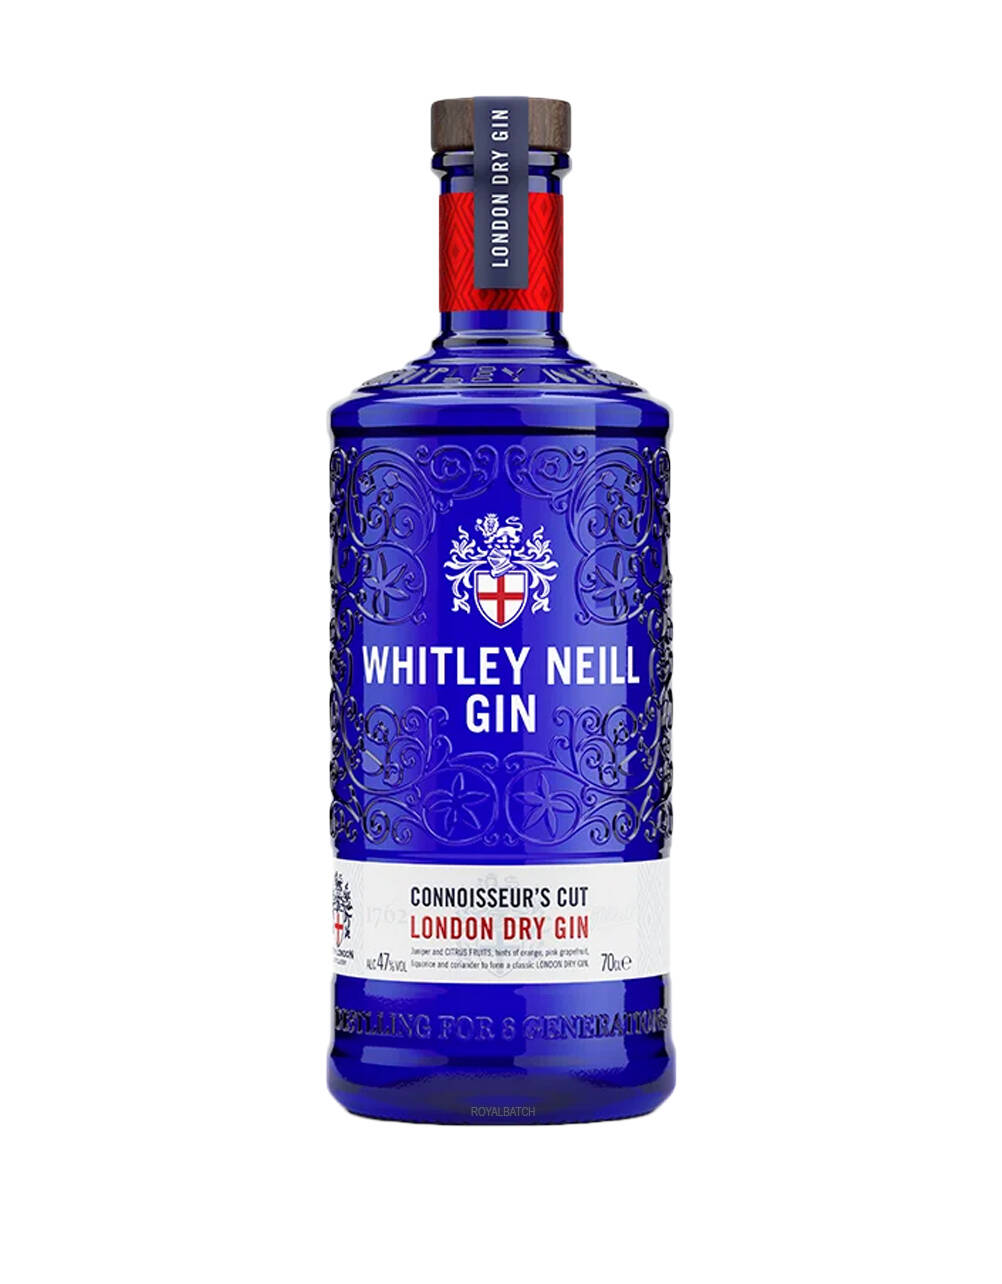 Whitley Neill Connoisseurs Cut London Dry Gin